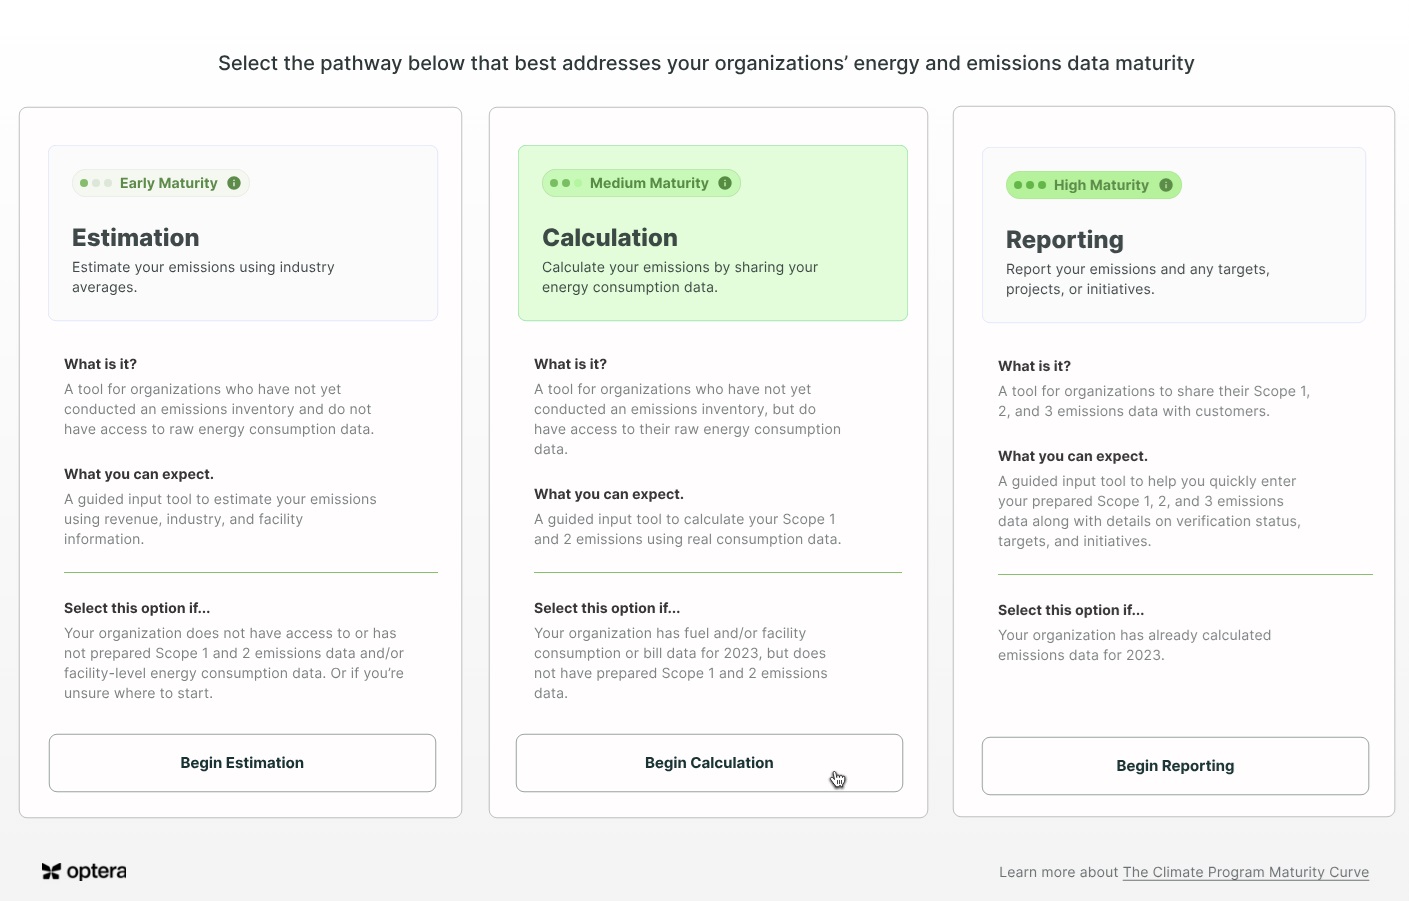 Optera Launches Solution Enabling Companies to Collect Emissions Data from Supply Chain